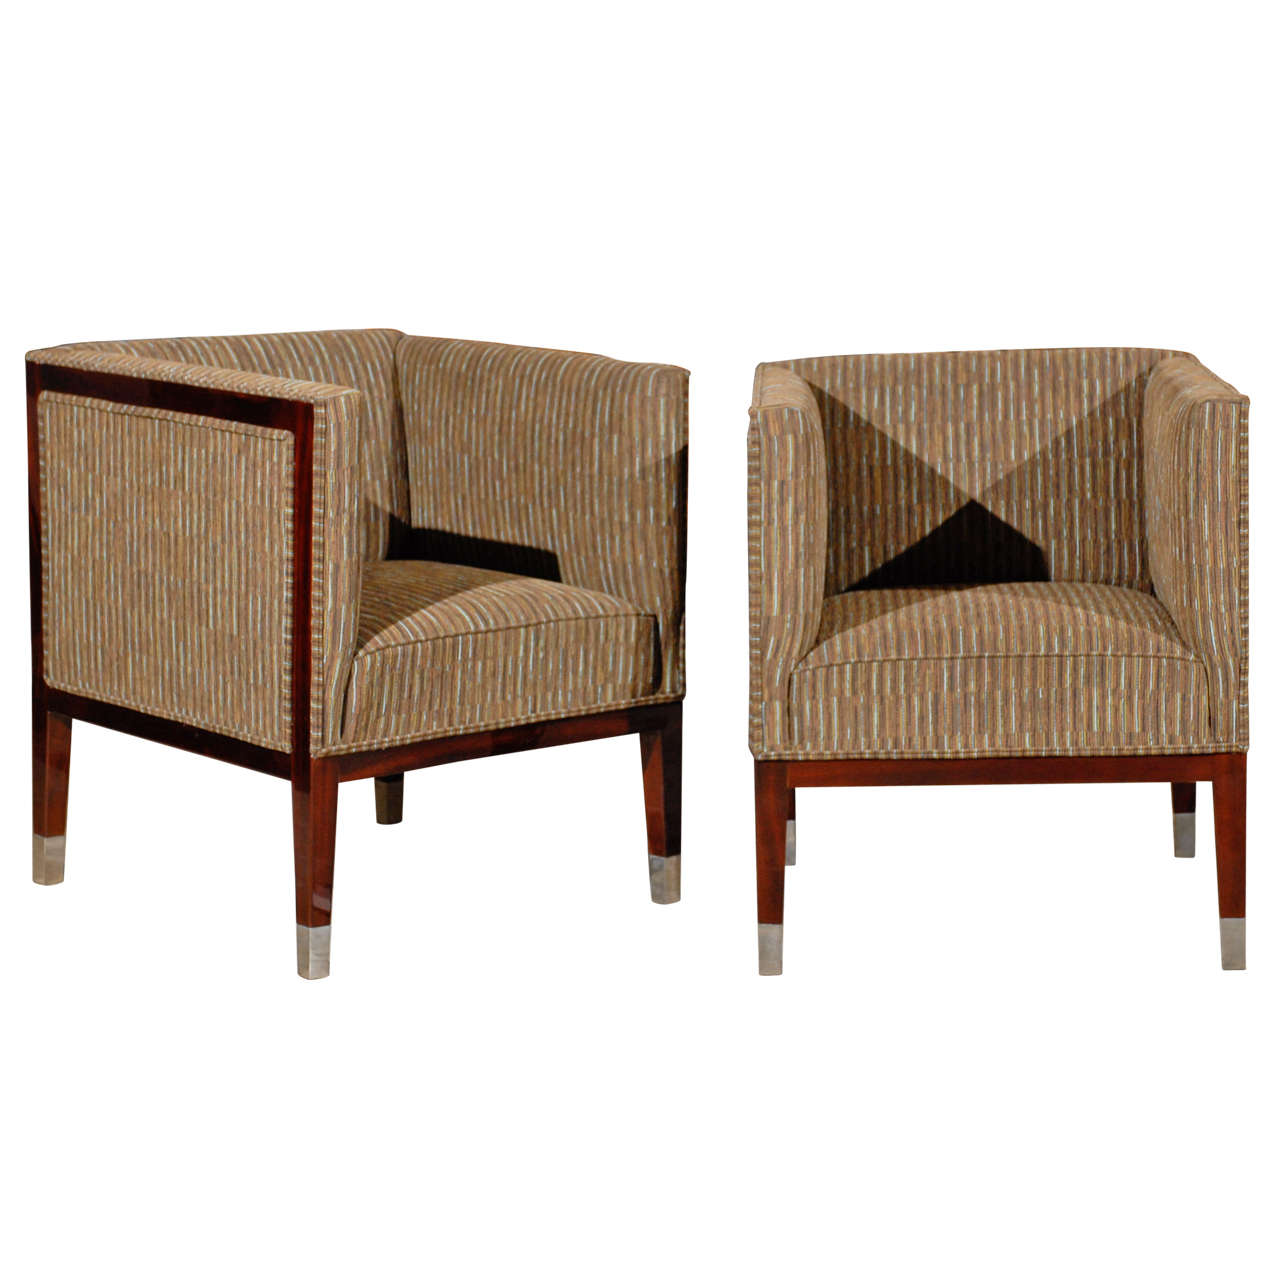 Pair  of Art Deco Period Upholstered Club Chairs with Wraparound Backs For Sale